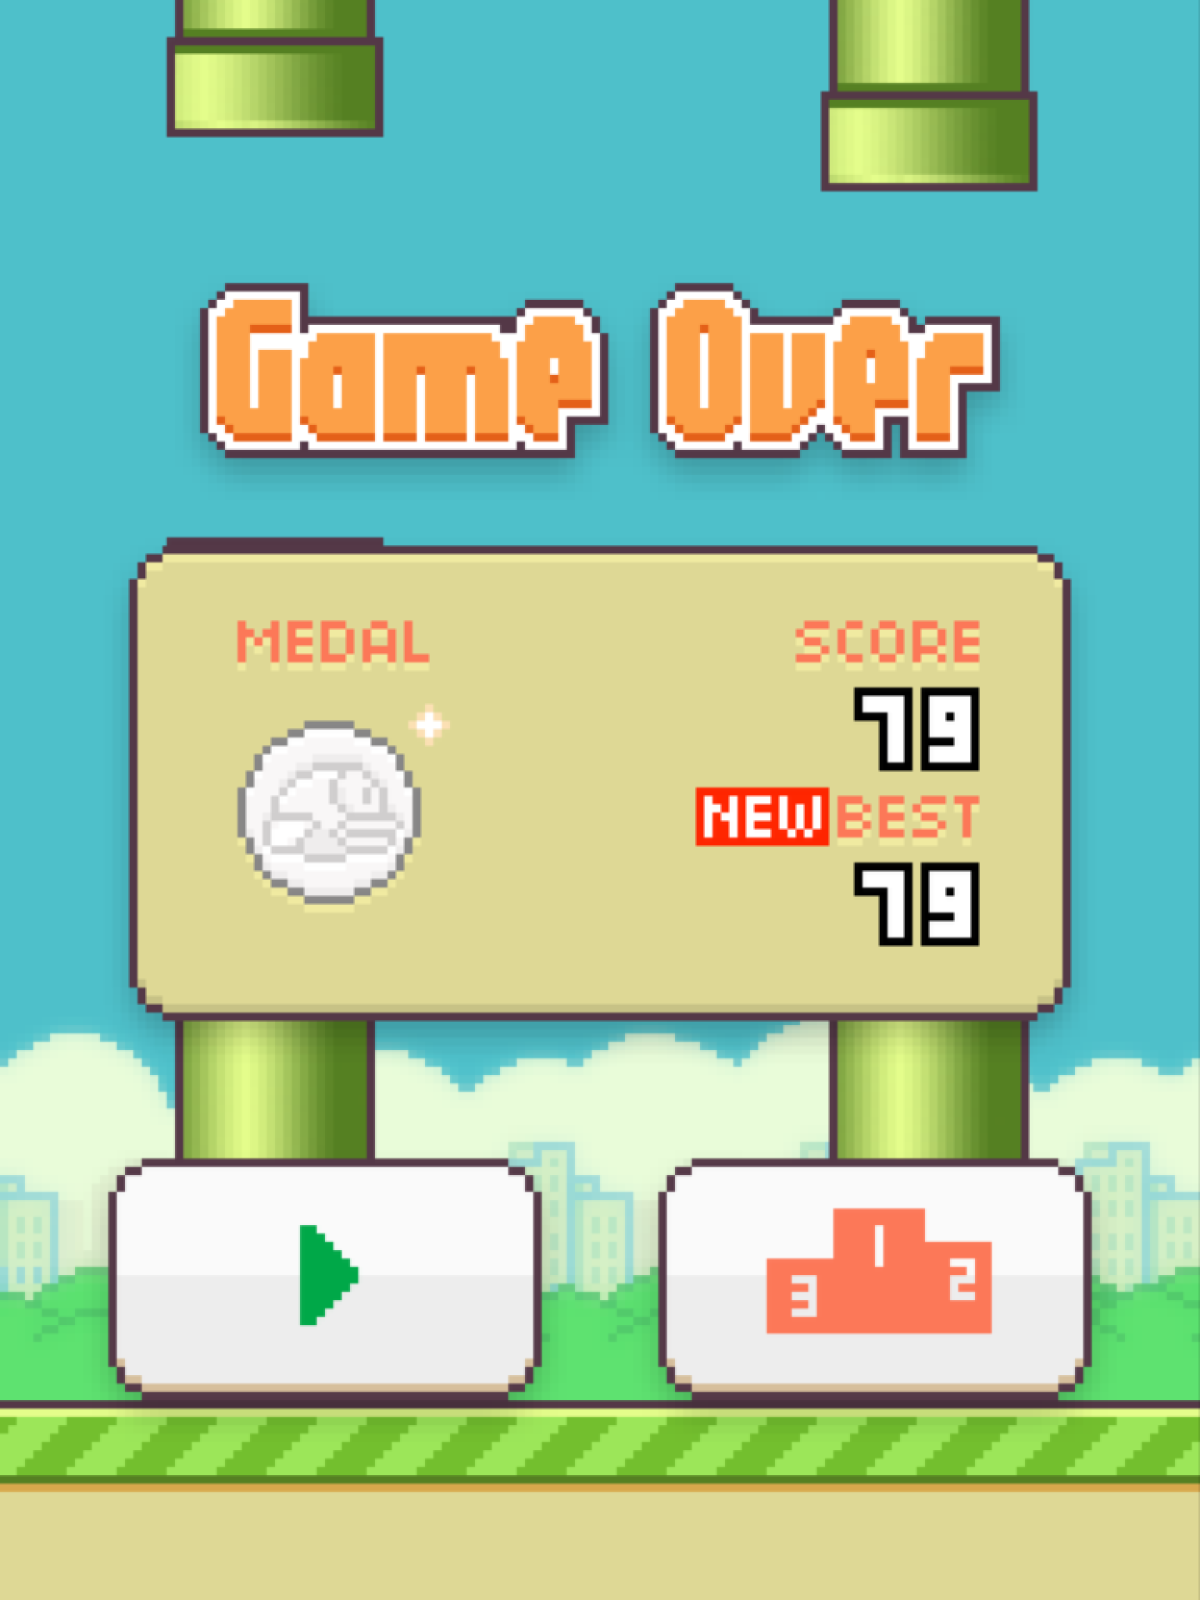 The creator of Flappy Bird, Dong Nguyen, said he felt guilty about the game's addictive nature.